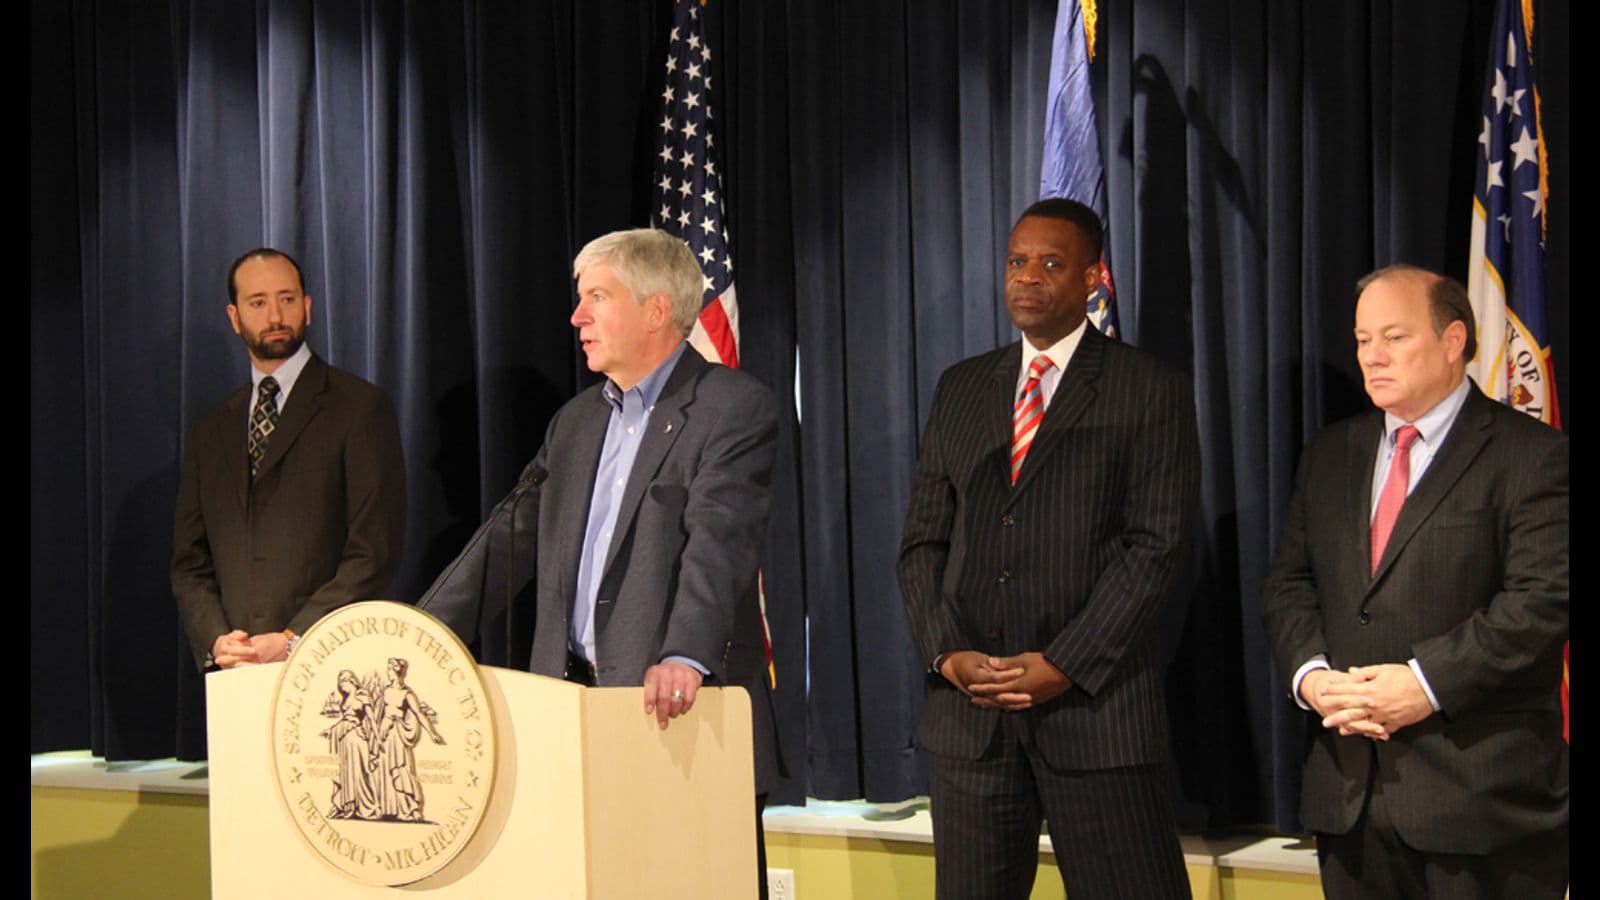 Michigan Governor Rick Snyder announces end to the Detroit bankruptcy proceedings on December 10, 2014, with City Councilman Gabe Leland, outgoing Emergency Manager Kevyn Orr and Mayor Mike Duggan behind him